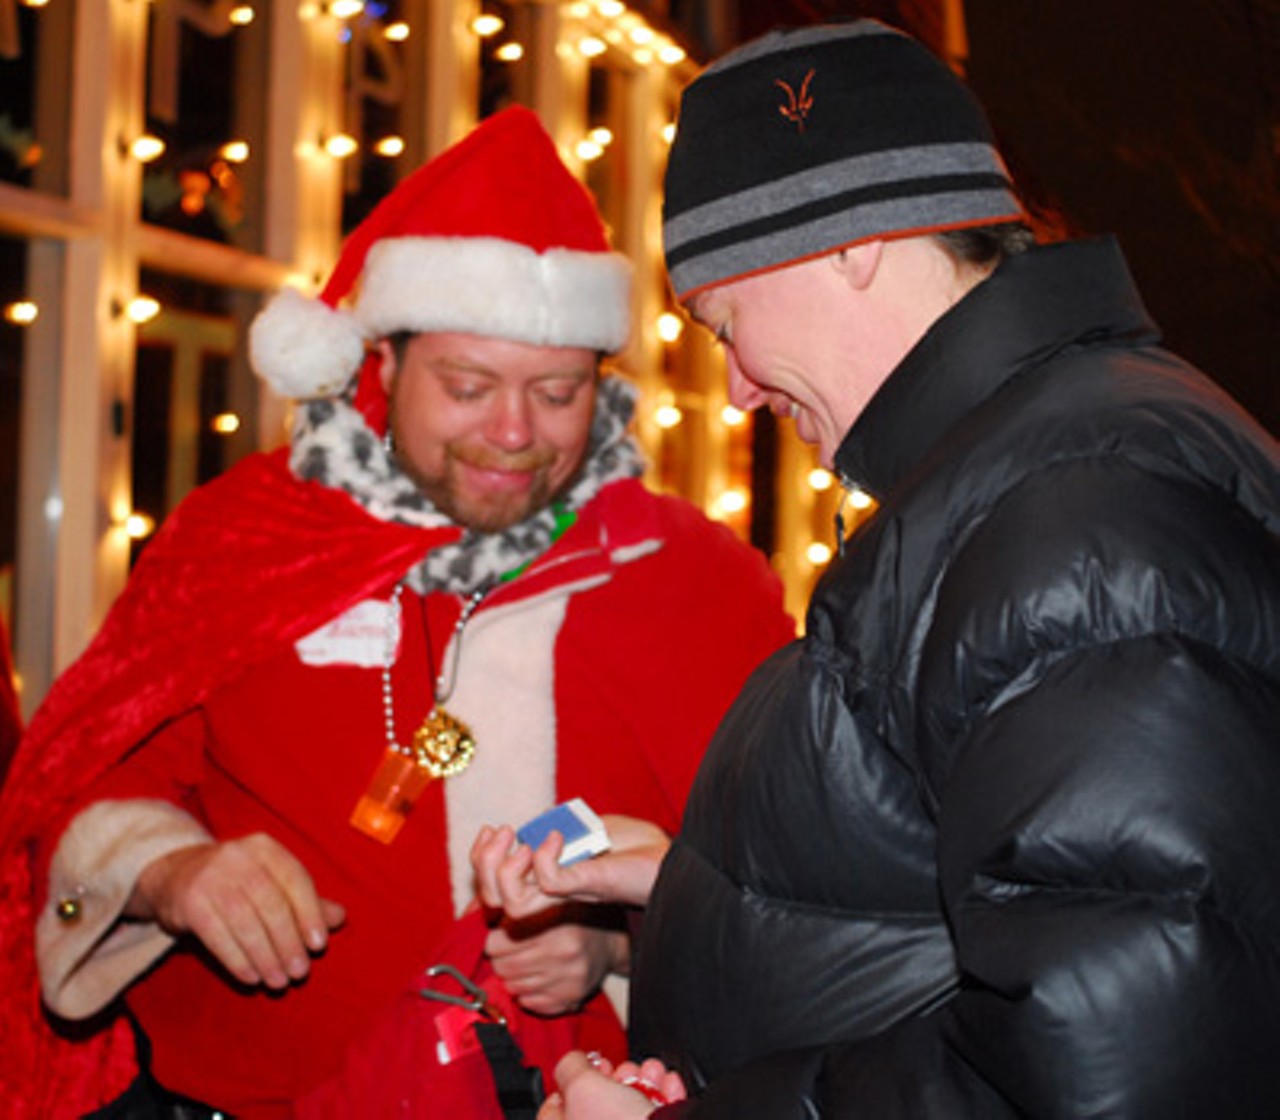 Lohr Barkley passes out presents to a passerby.